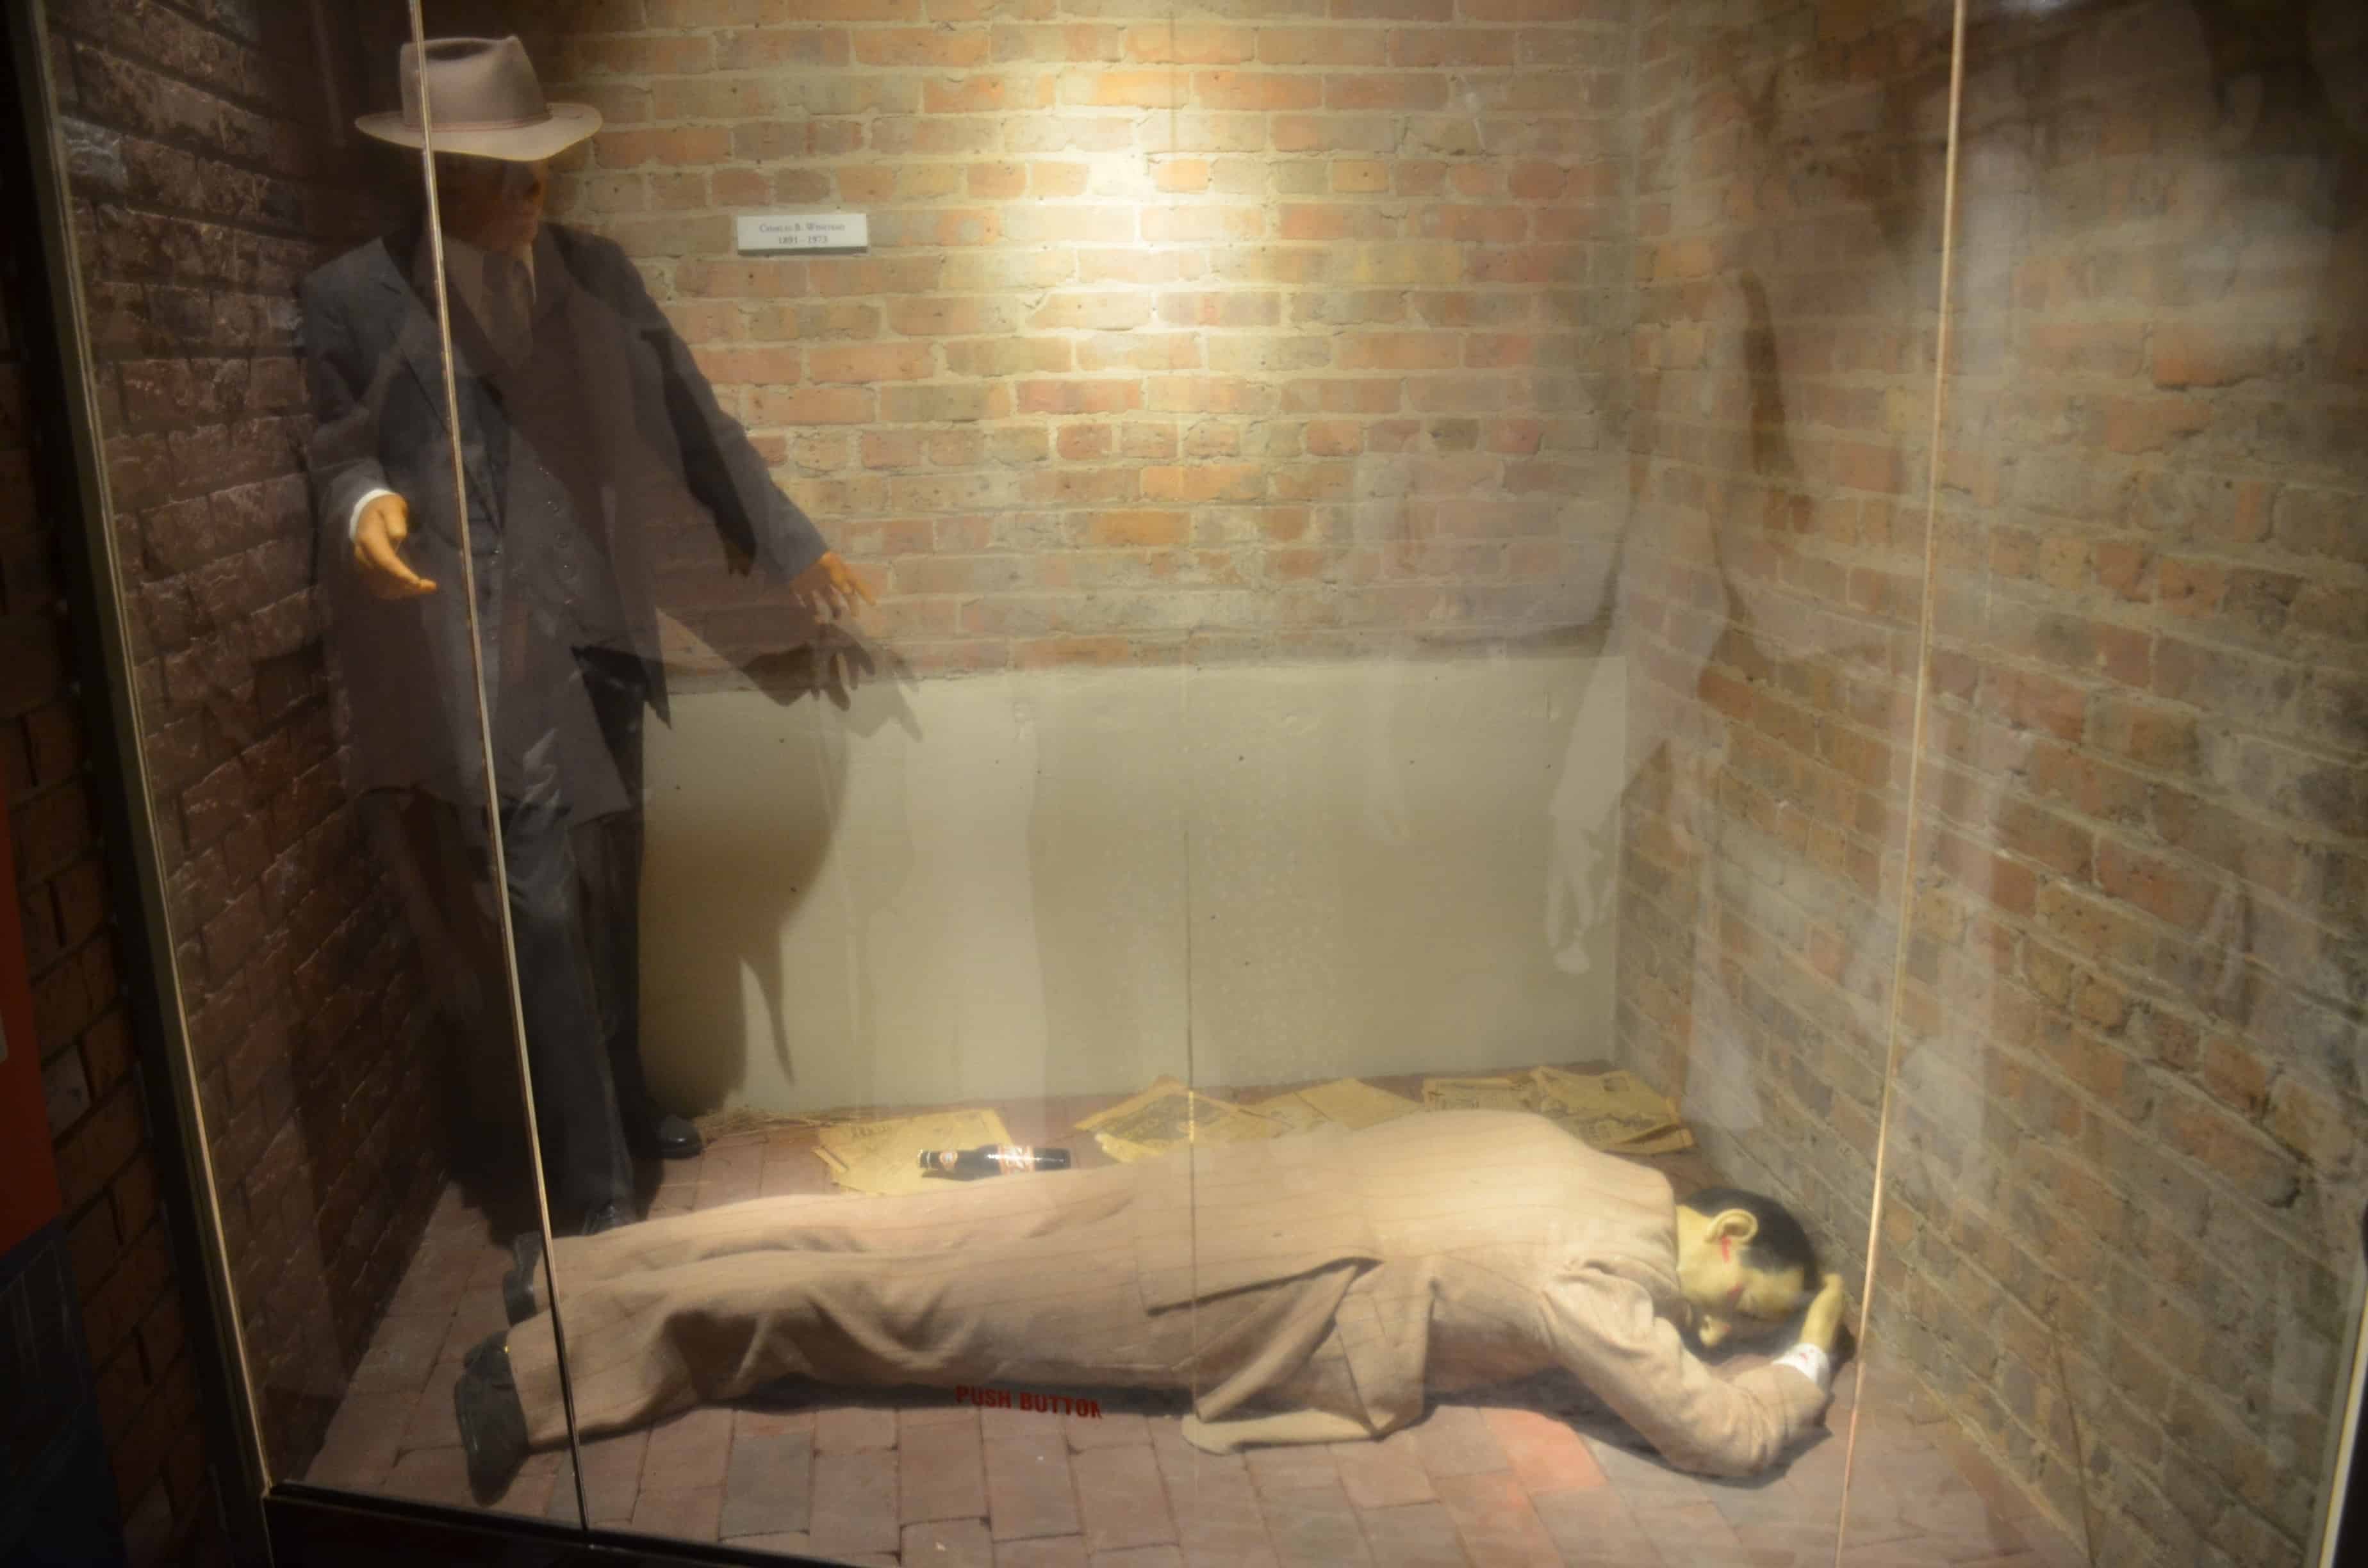 John Dillinger's death scene at the John Dillinger Museum in Crown Point, Indiana